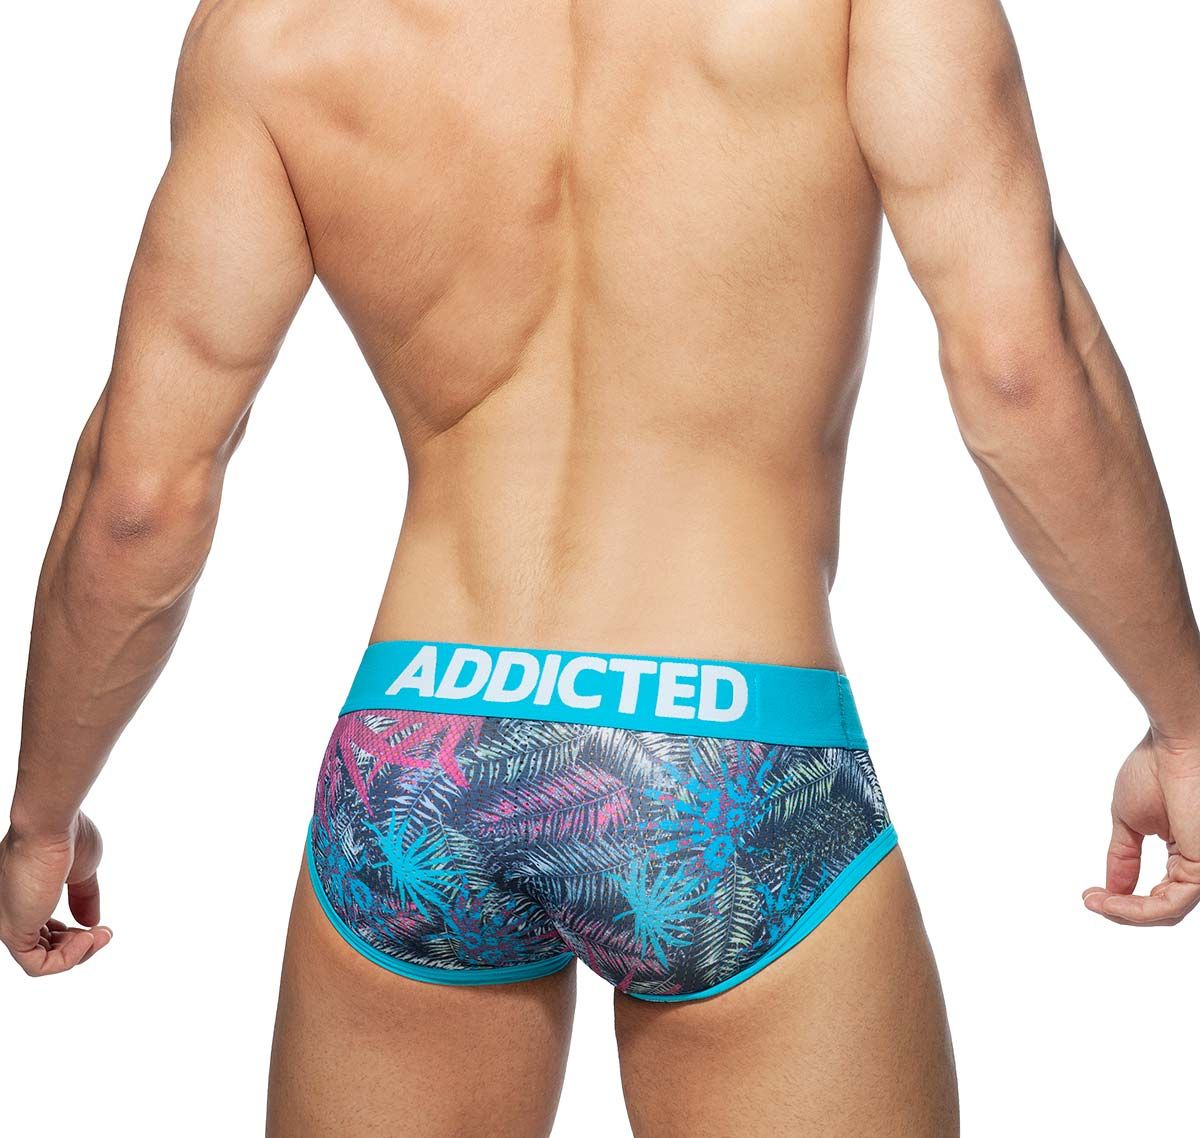 Addicted 3 Paquet Slips 3 PACK TROPICAL MESH BRIEF PUSH UP, AD889P, multicolore